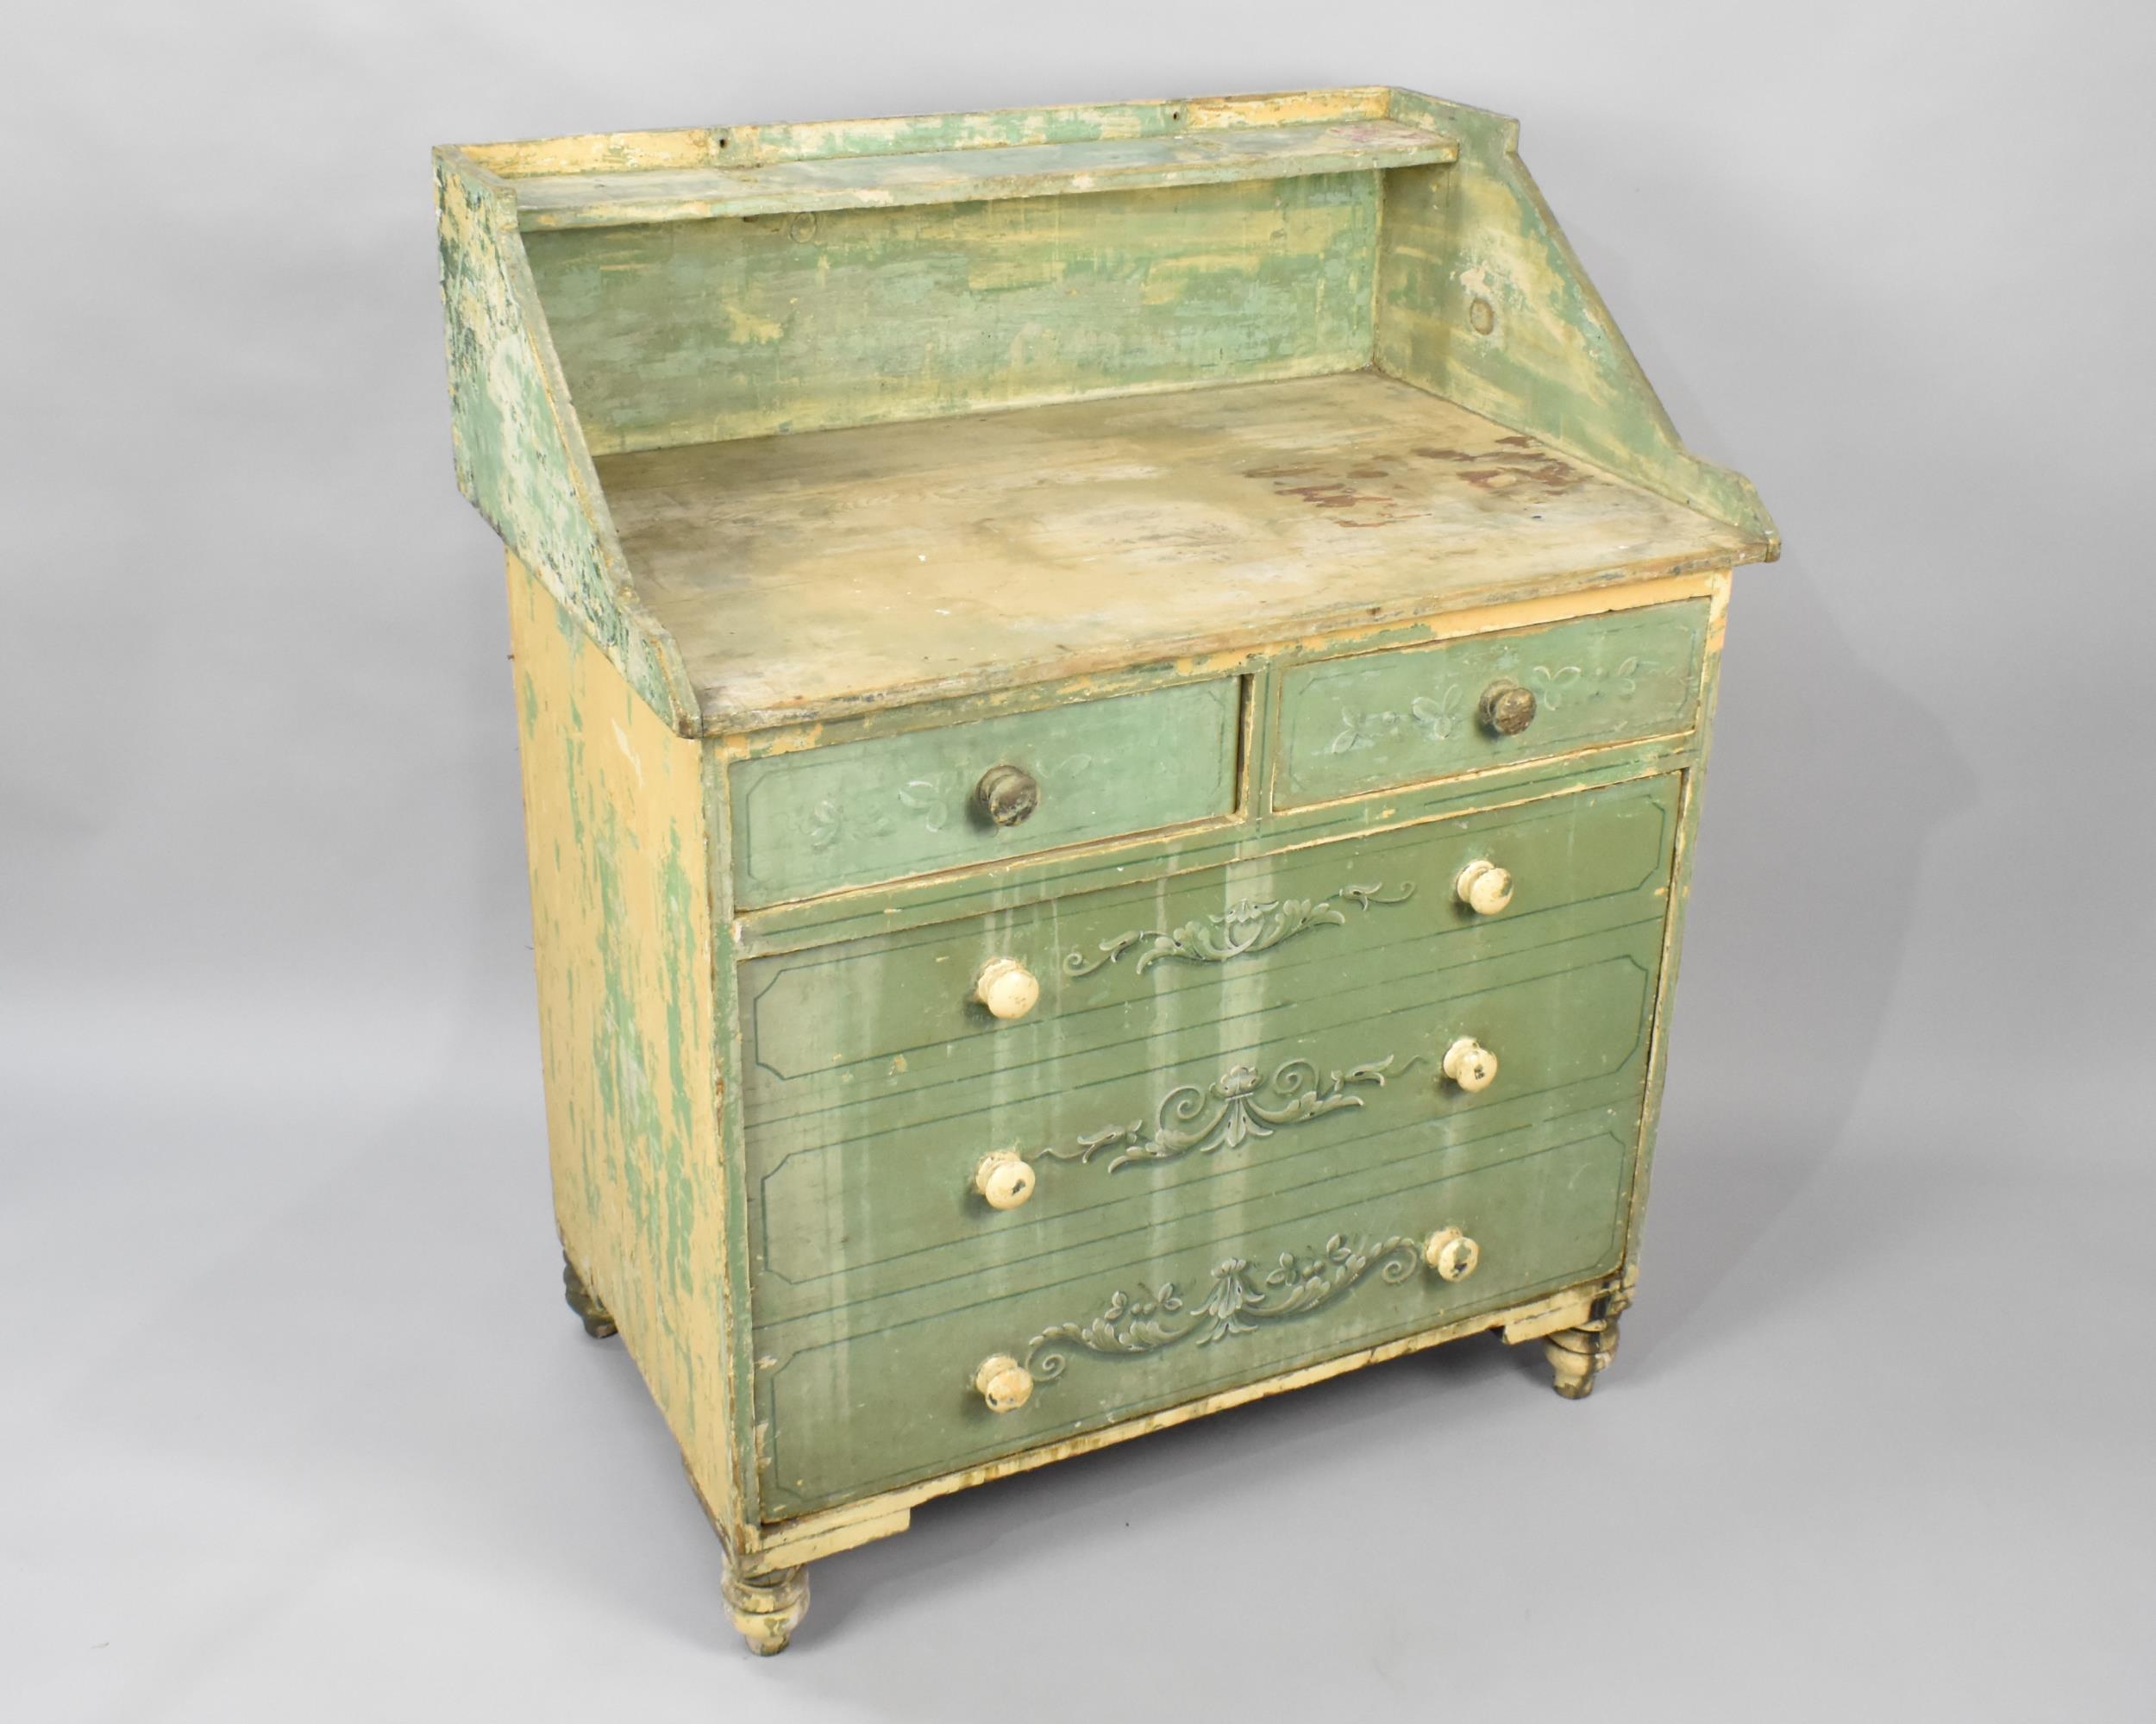 A 19th Century Painted Pine Washstand with Trompe L'oeil Decoration, Reverse Lining and Acanthus - Image 2 of 4